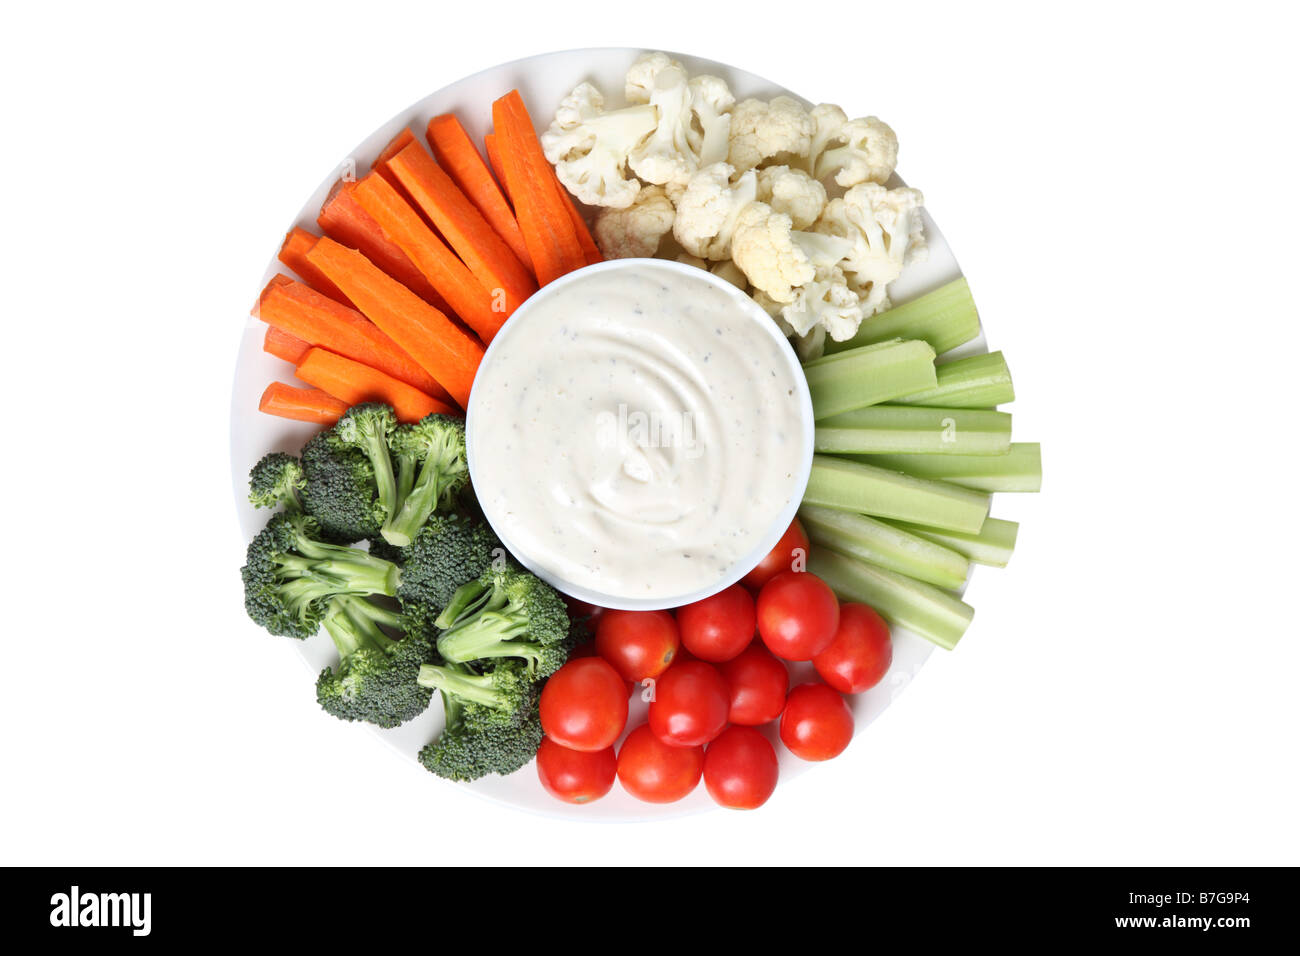 Vegetable platter with cauliflower celery tomatoes broccoli carrot sticks and ranch dip Stock Photo